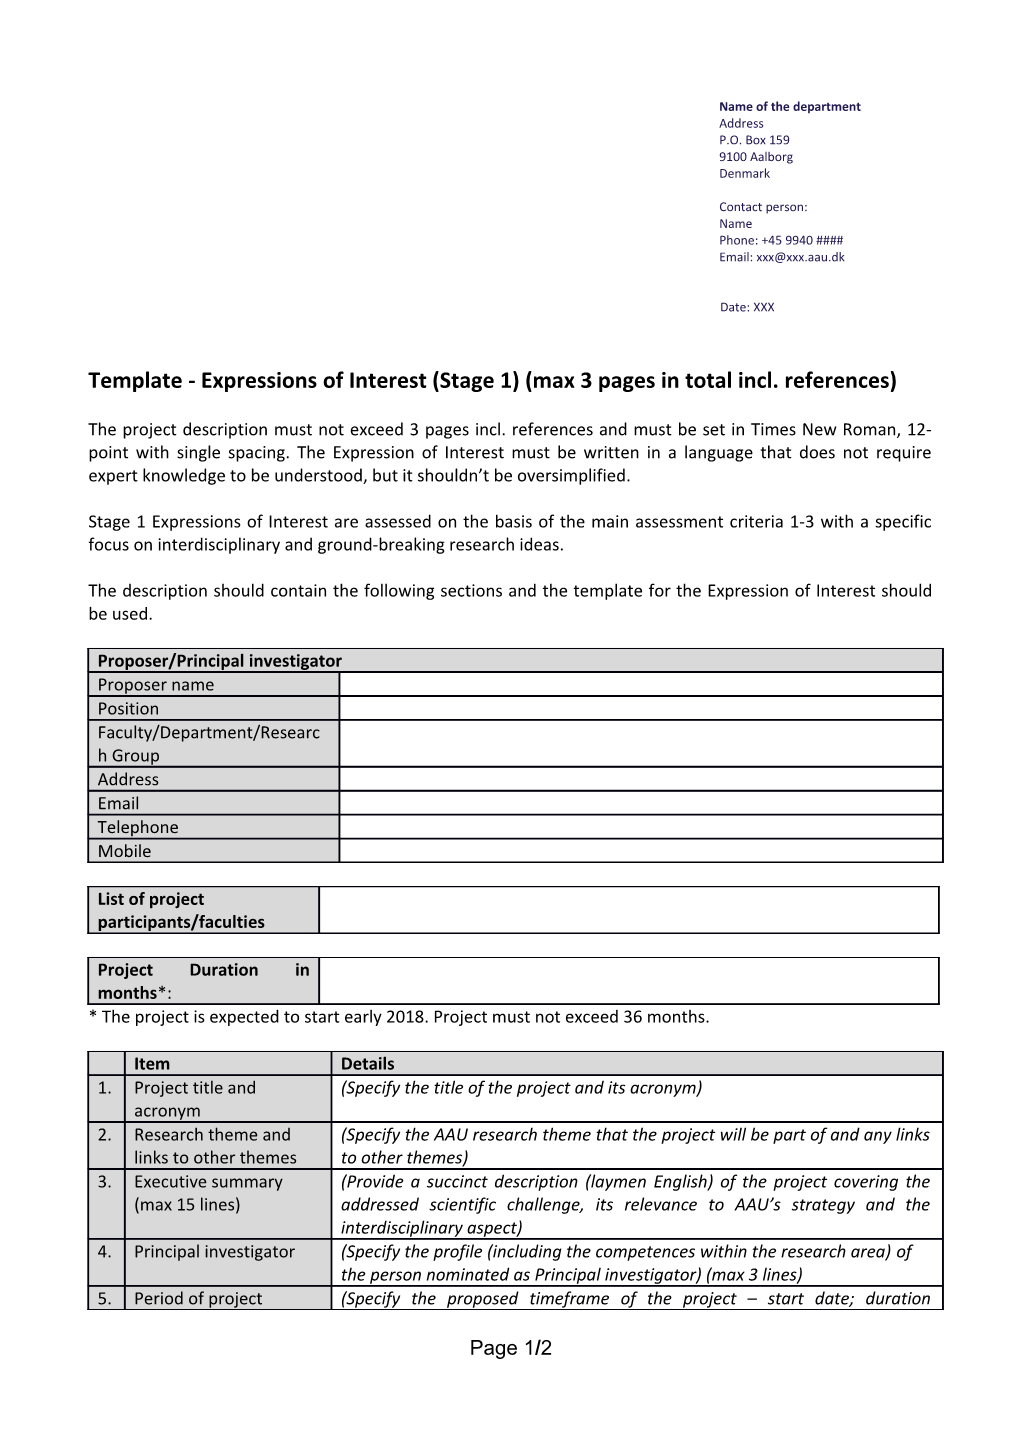 Template - Expressions of Interest (Stage 1) (Max 3 Pages in Total Incl. References)